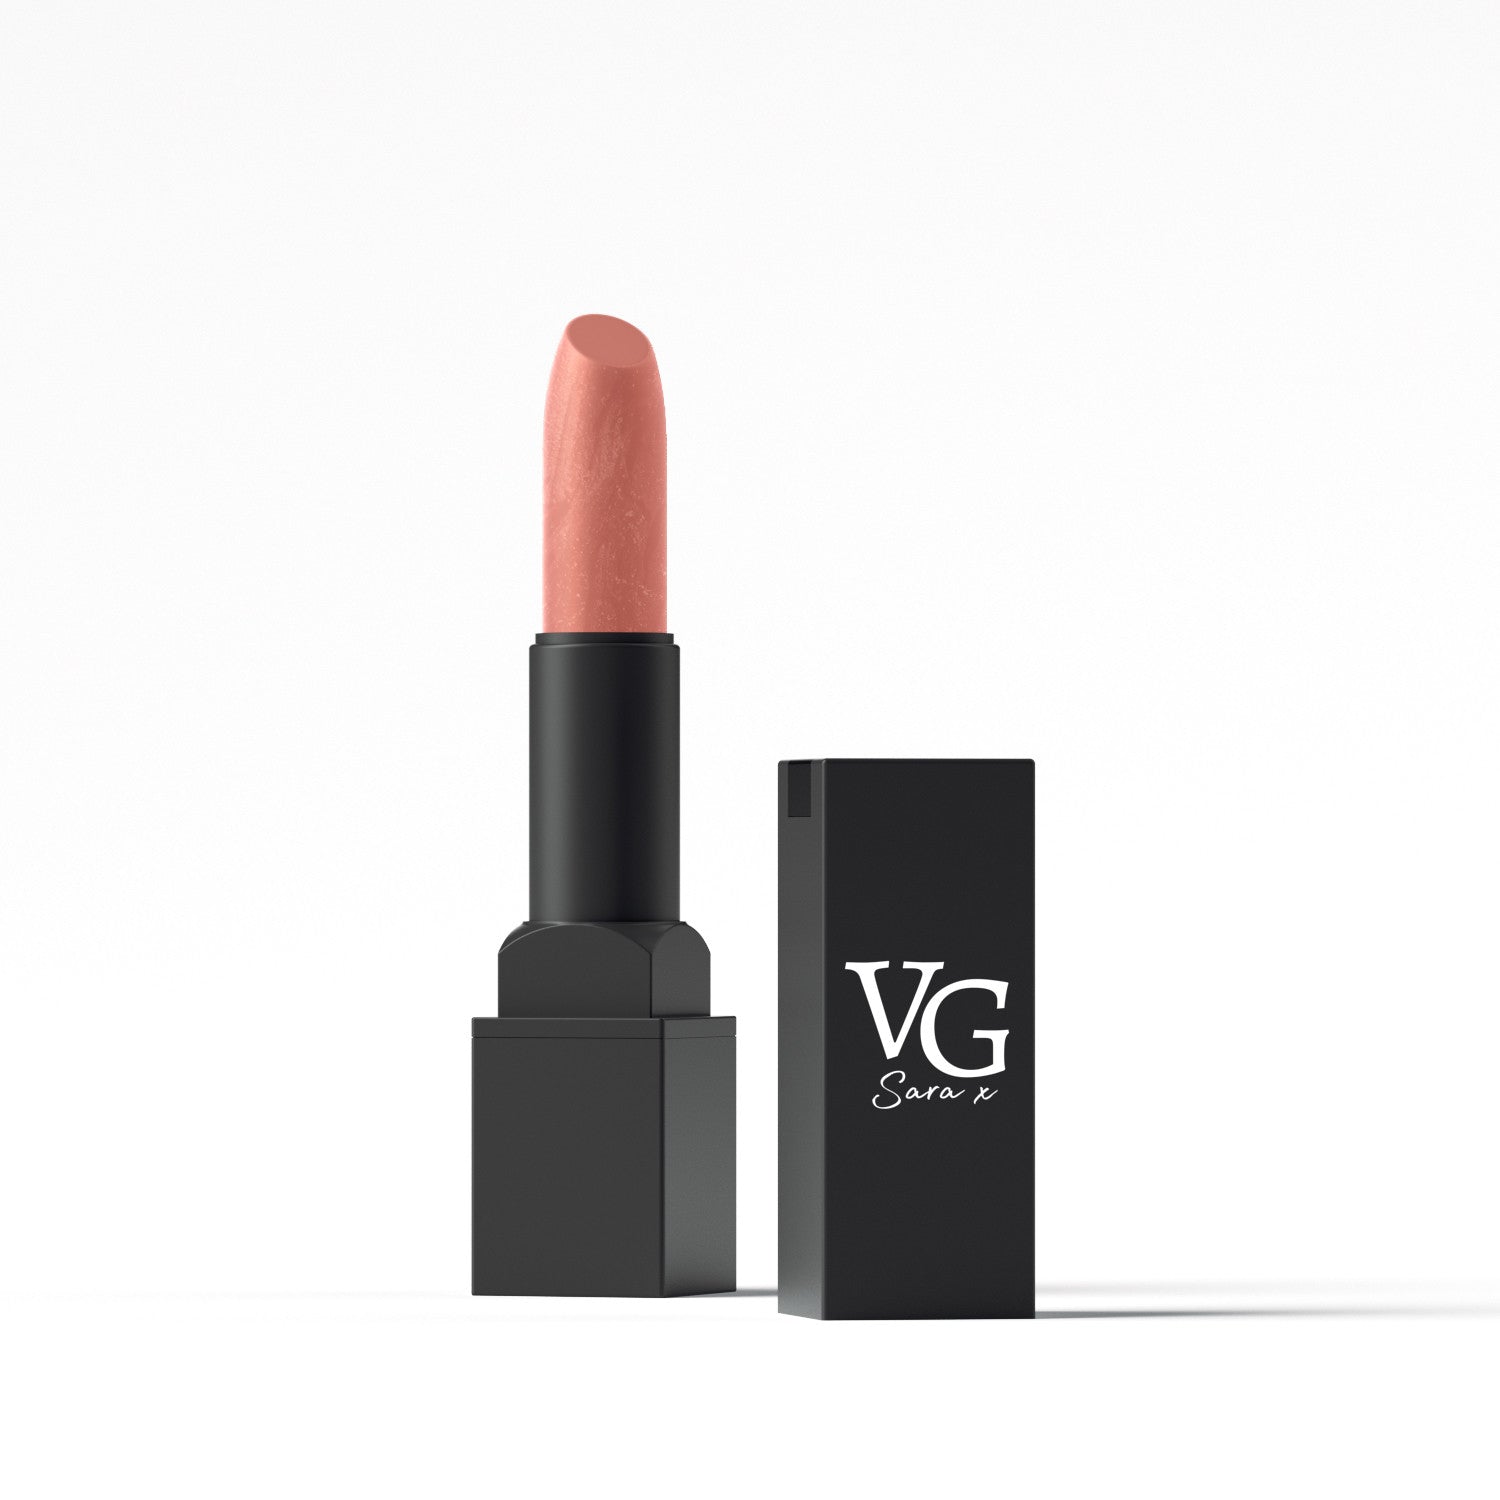 Detailed view of VG Cosmetics lipstick with brand imprint